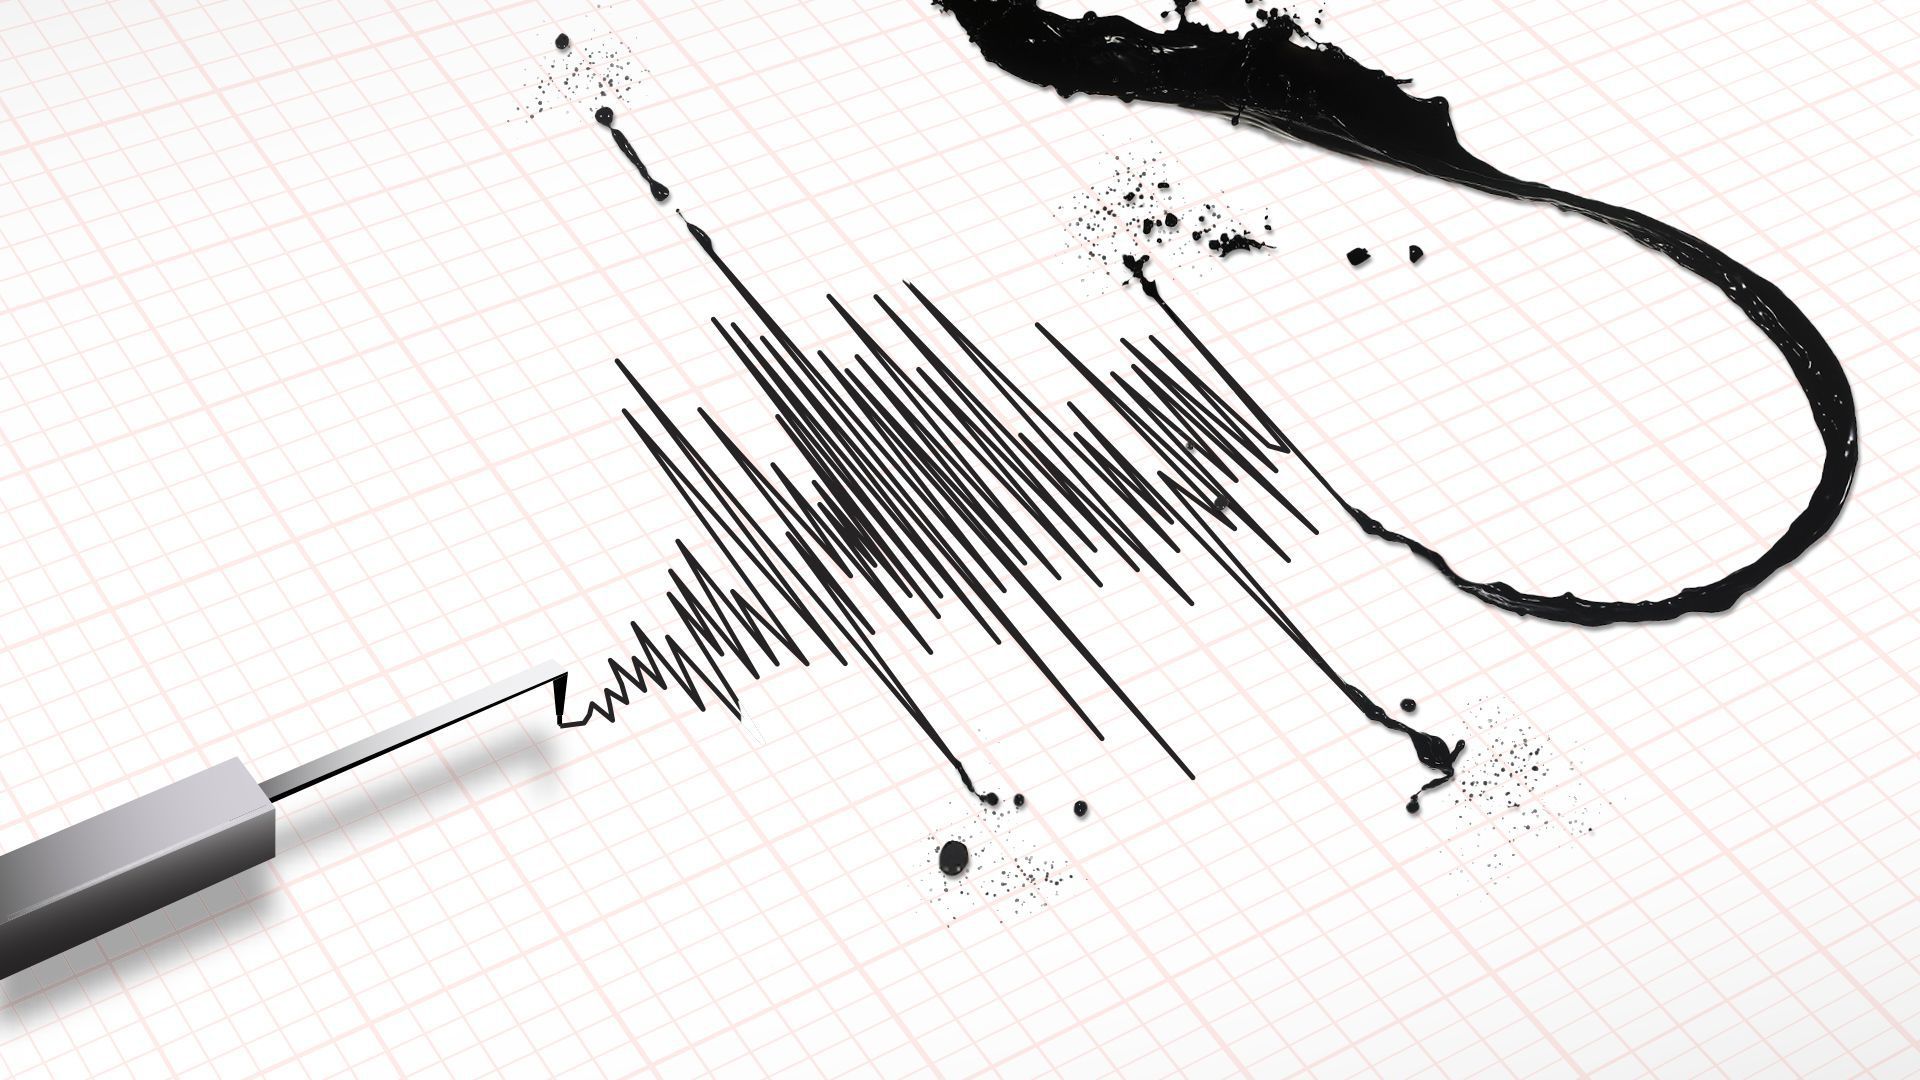 Illustration of a seismometer.